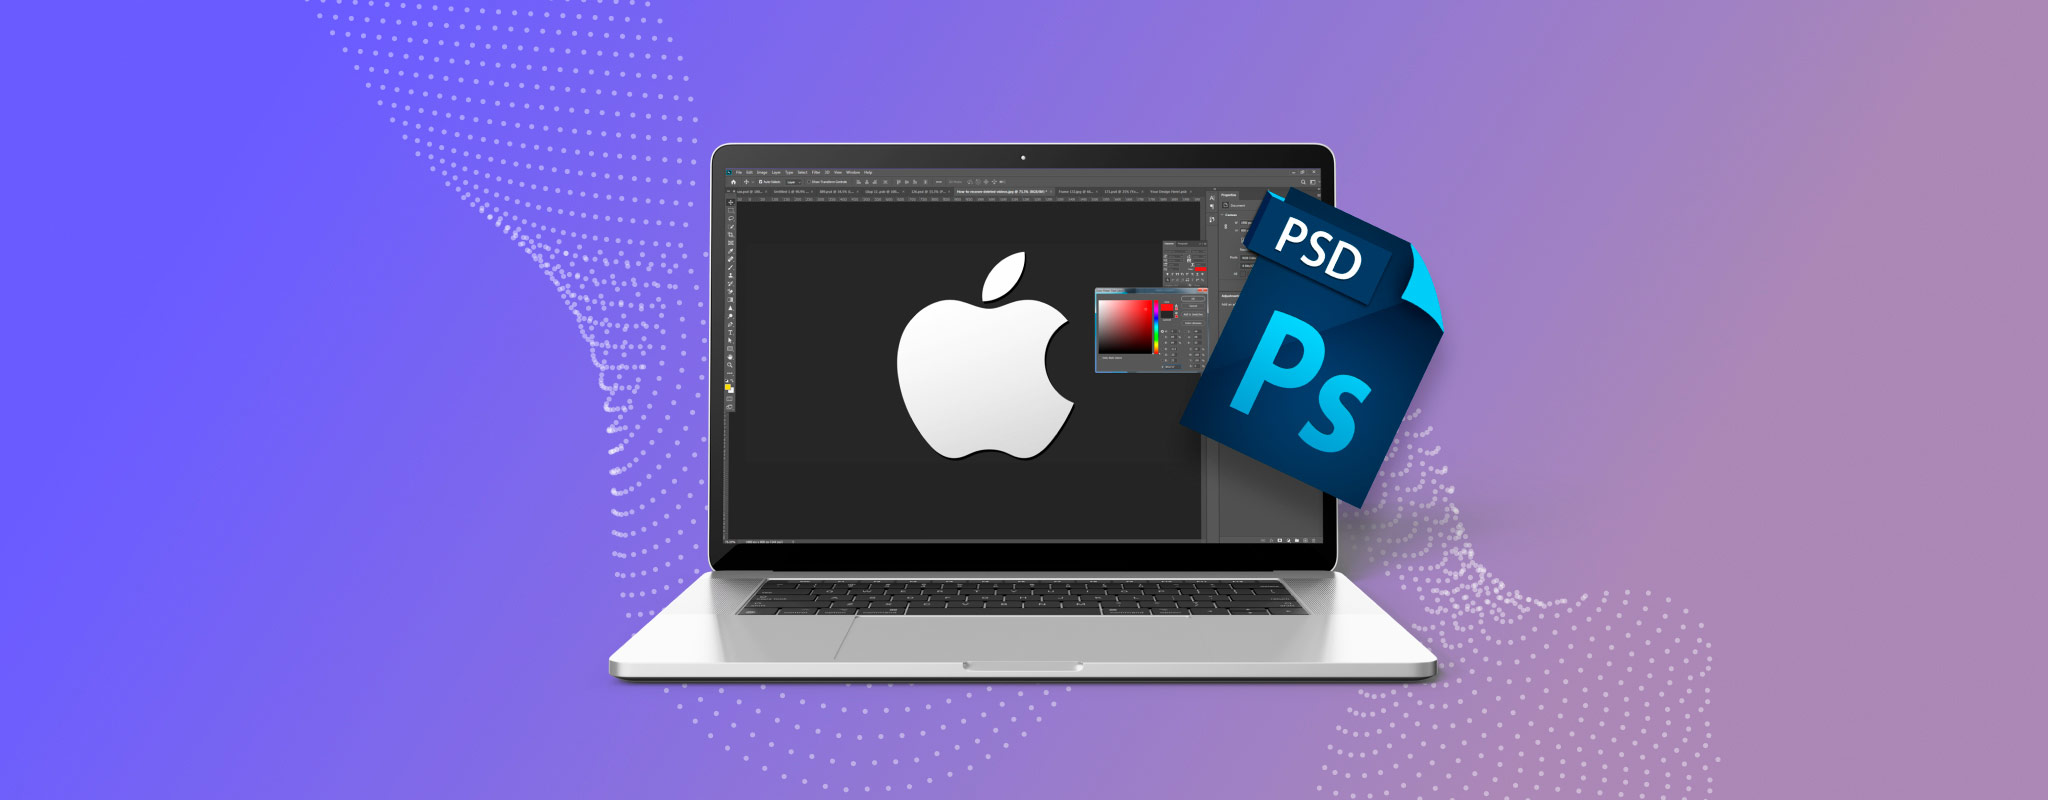 make a folder from photos on mac for photoshop